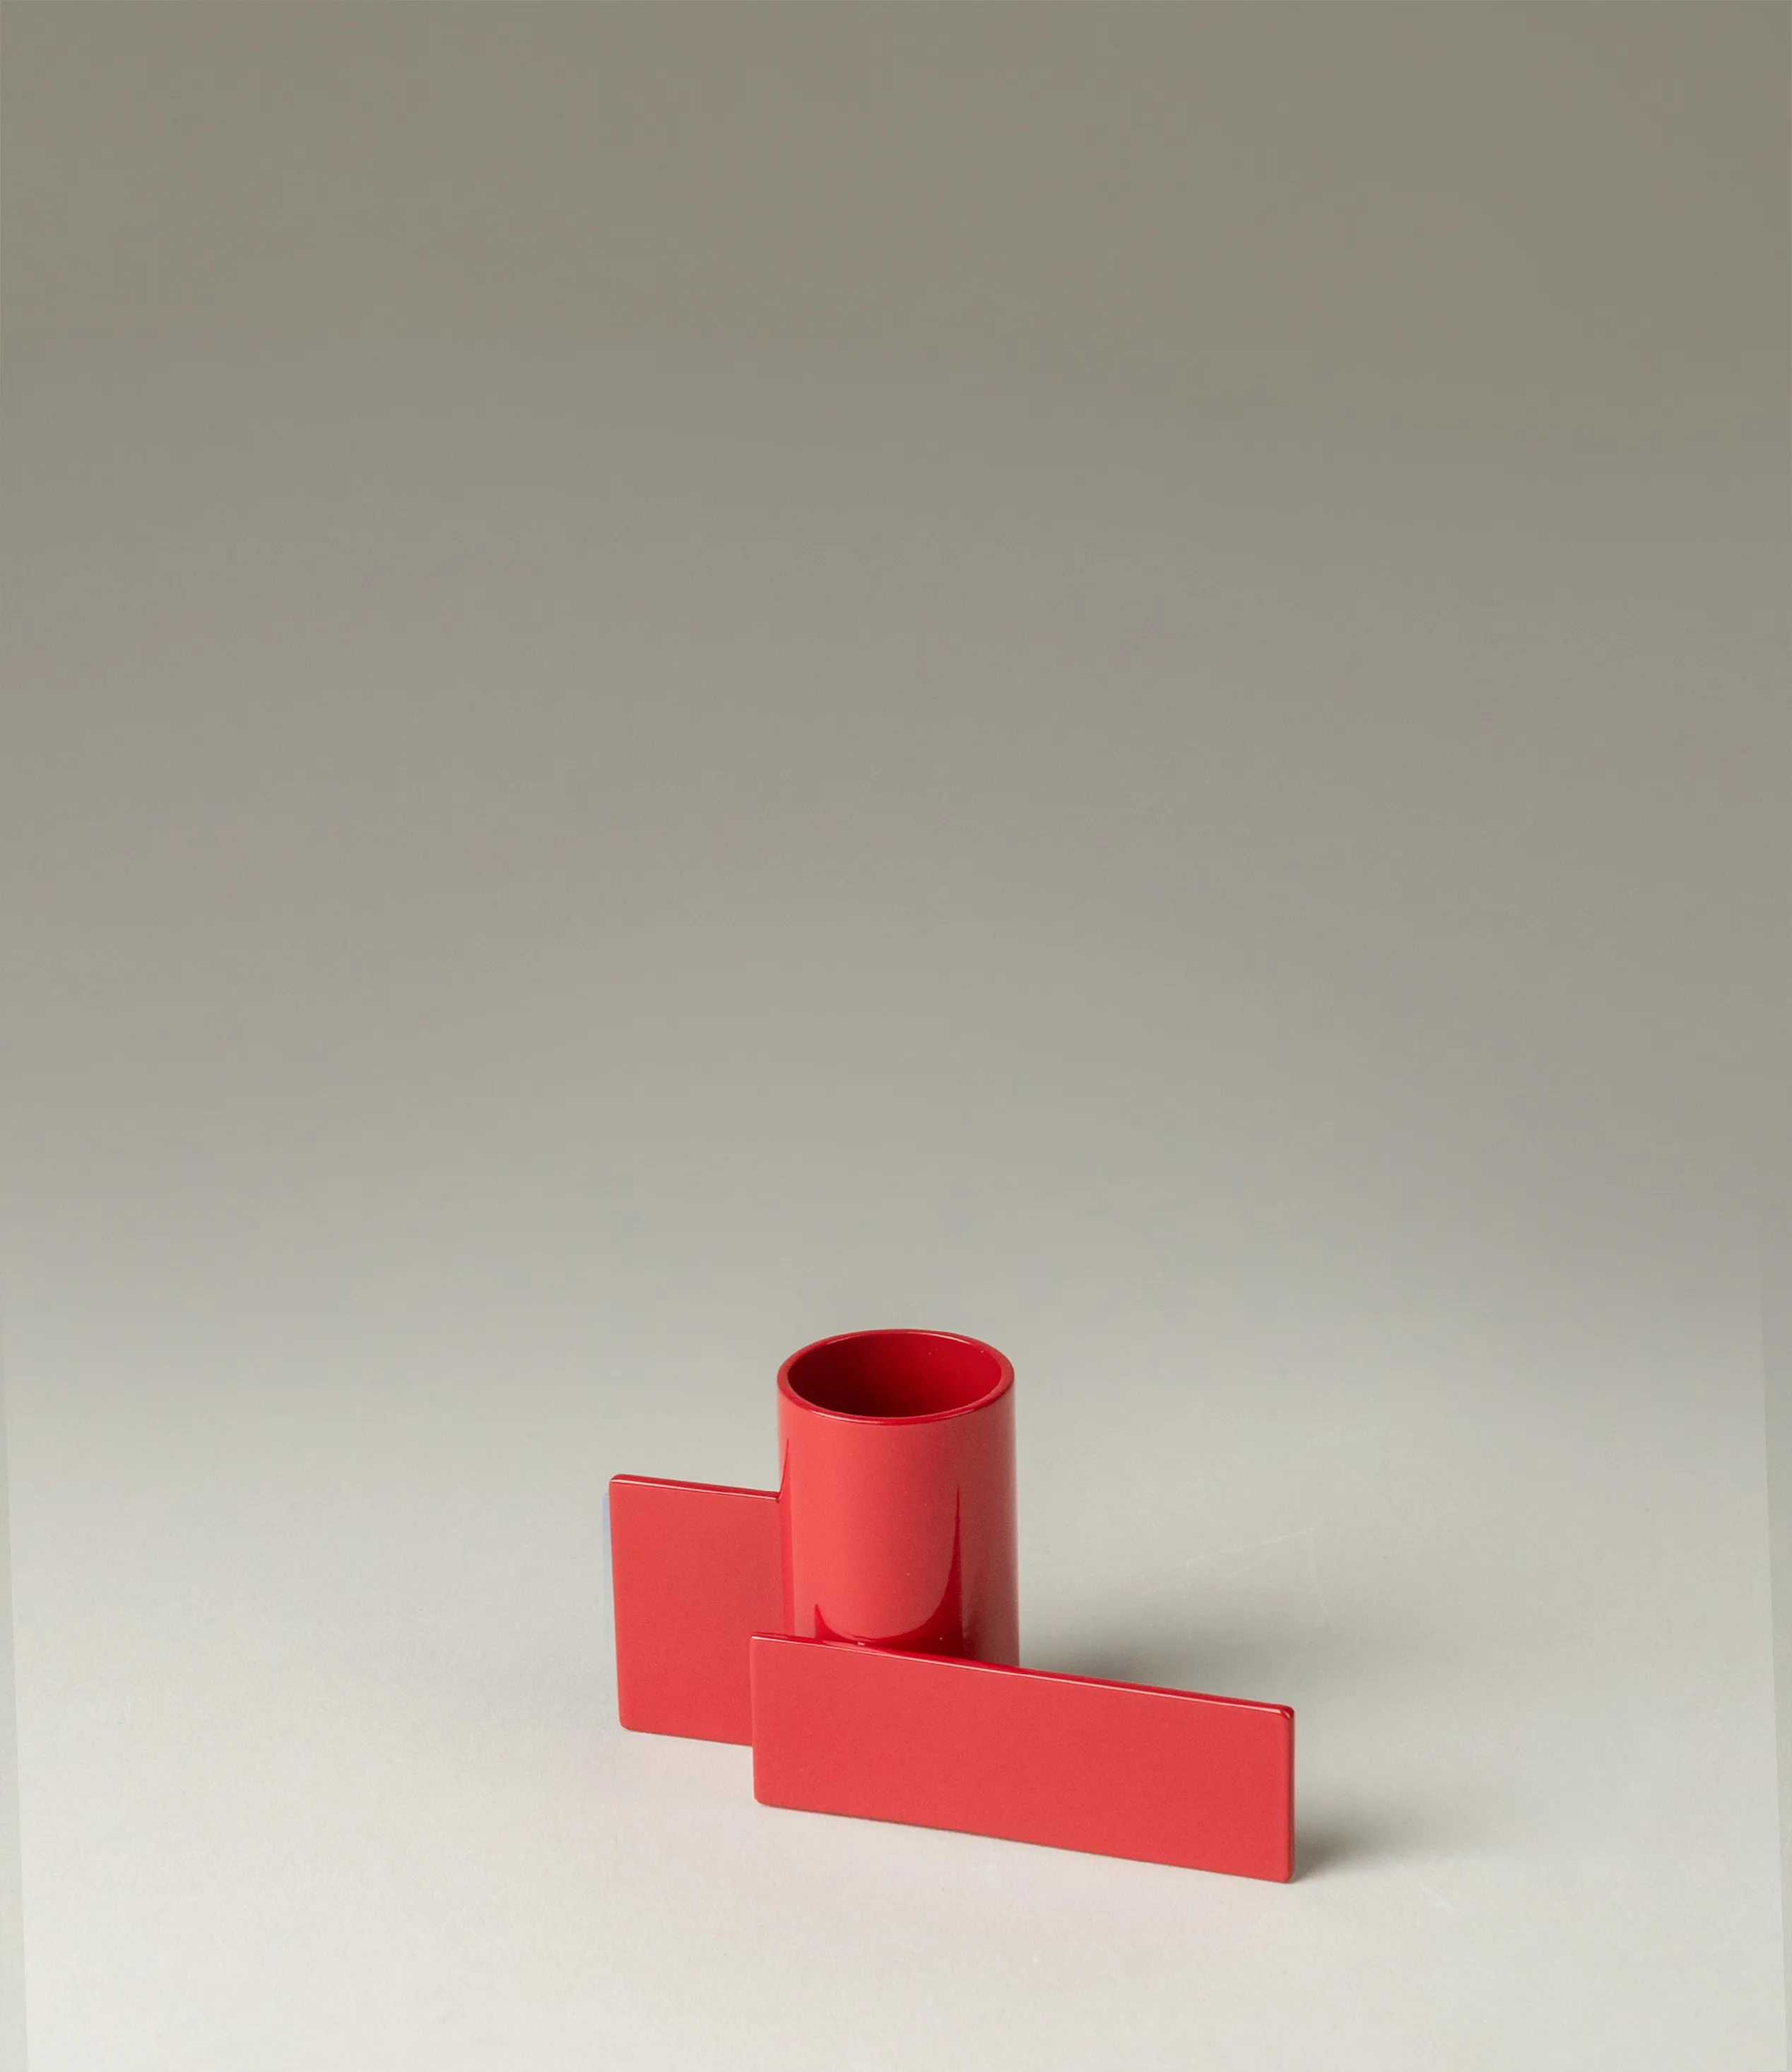 Icon Iysestage 01 from Stences is a candleholder made for taper candles. This picture shows the red variant of this item. The steel material has a glossy surface which emphasize the soft geometric shapes of the product in question.